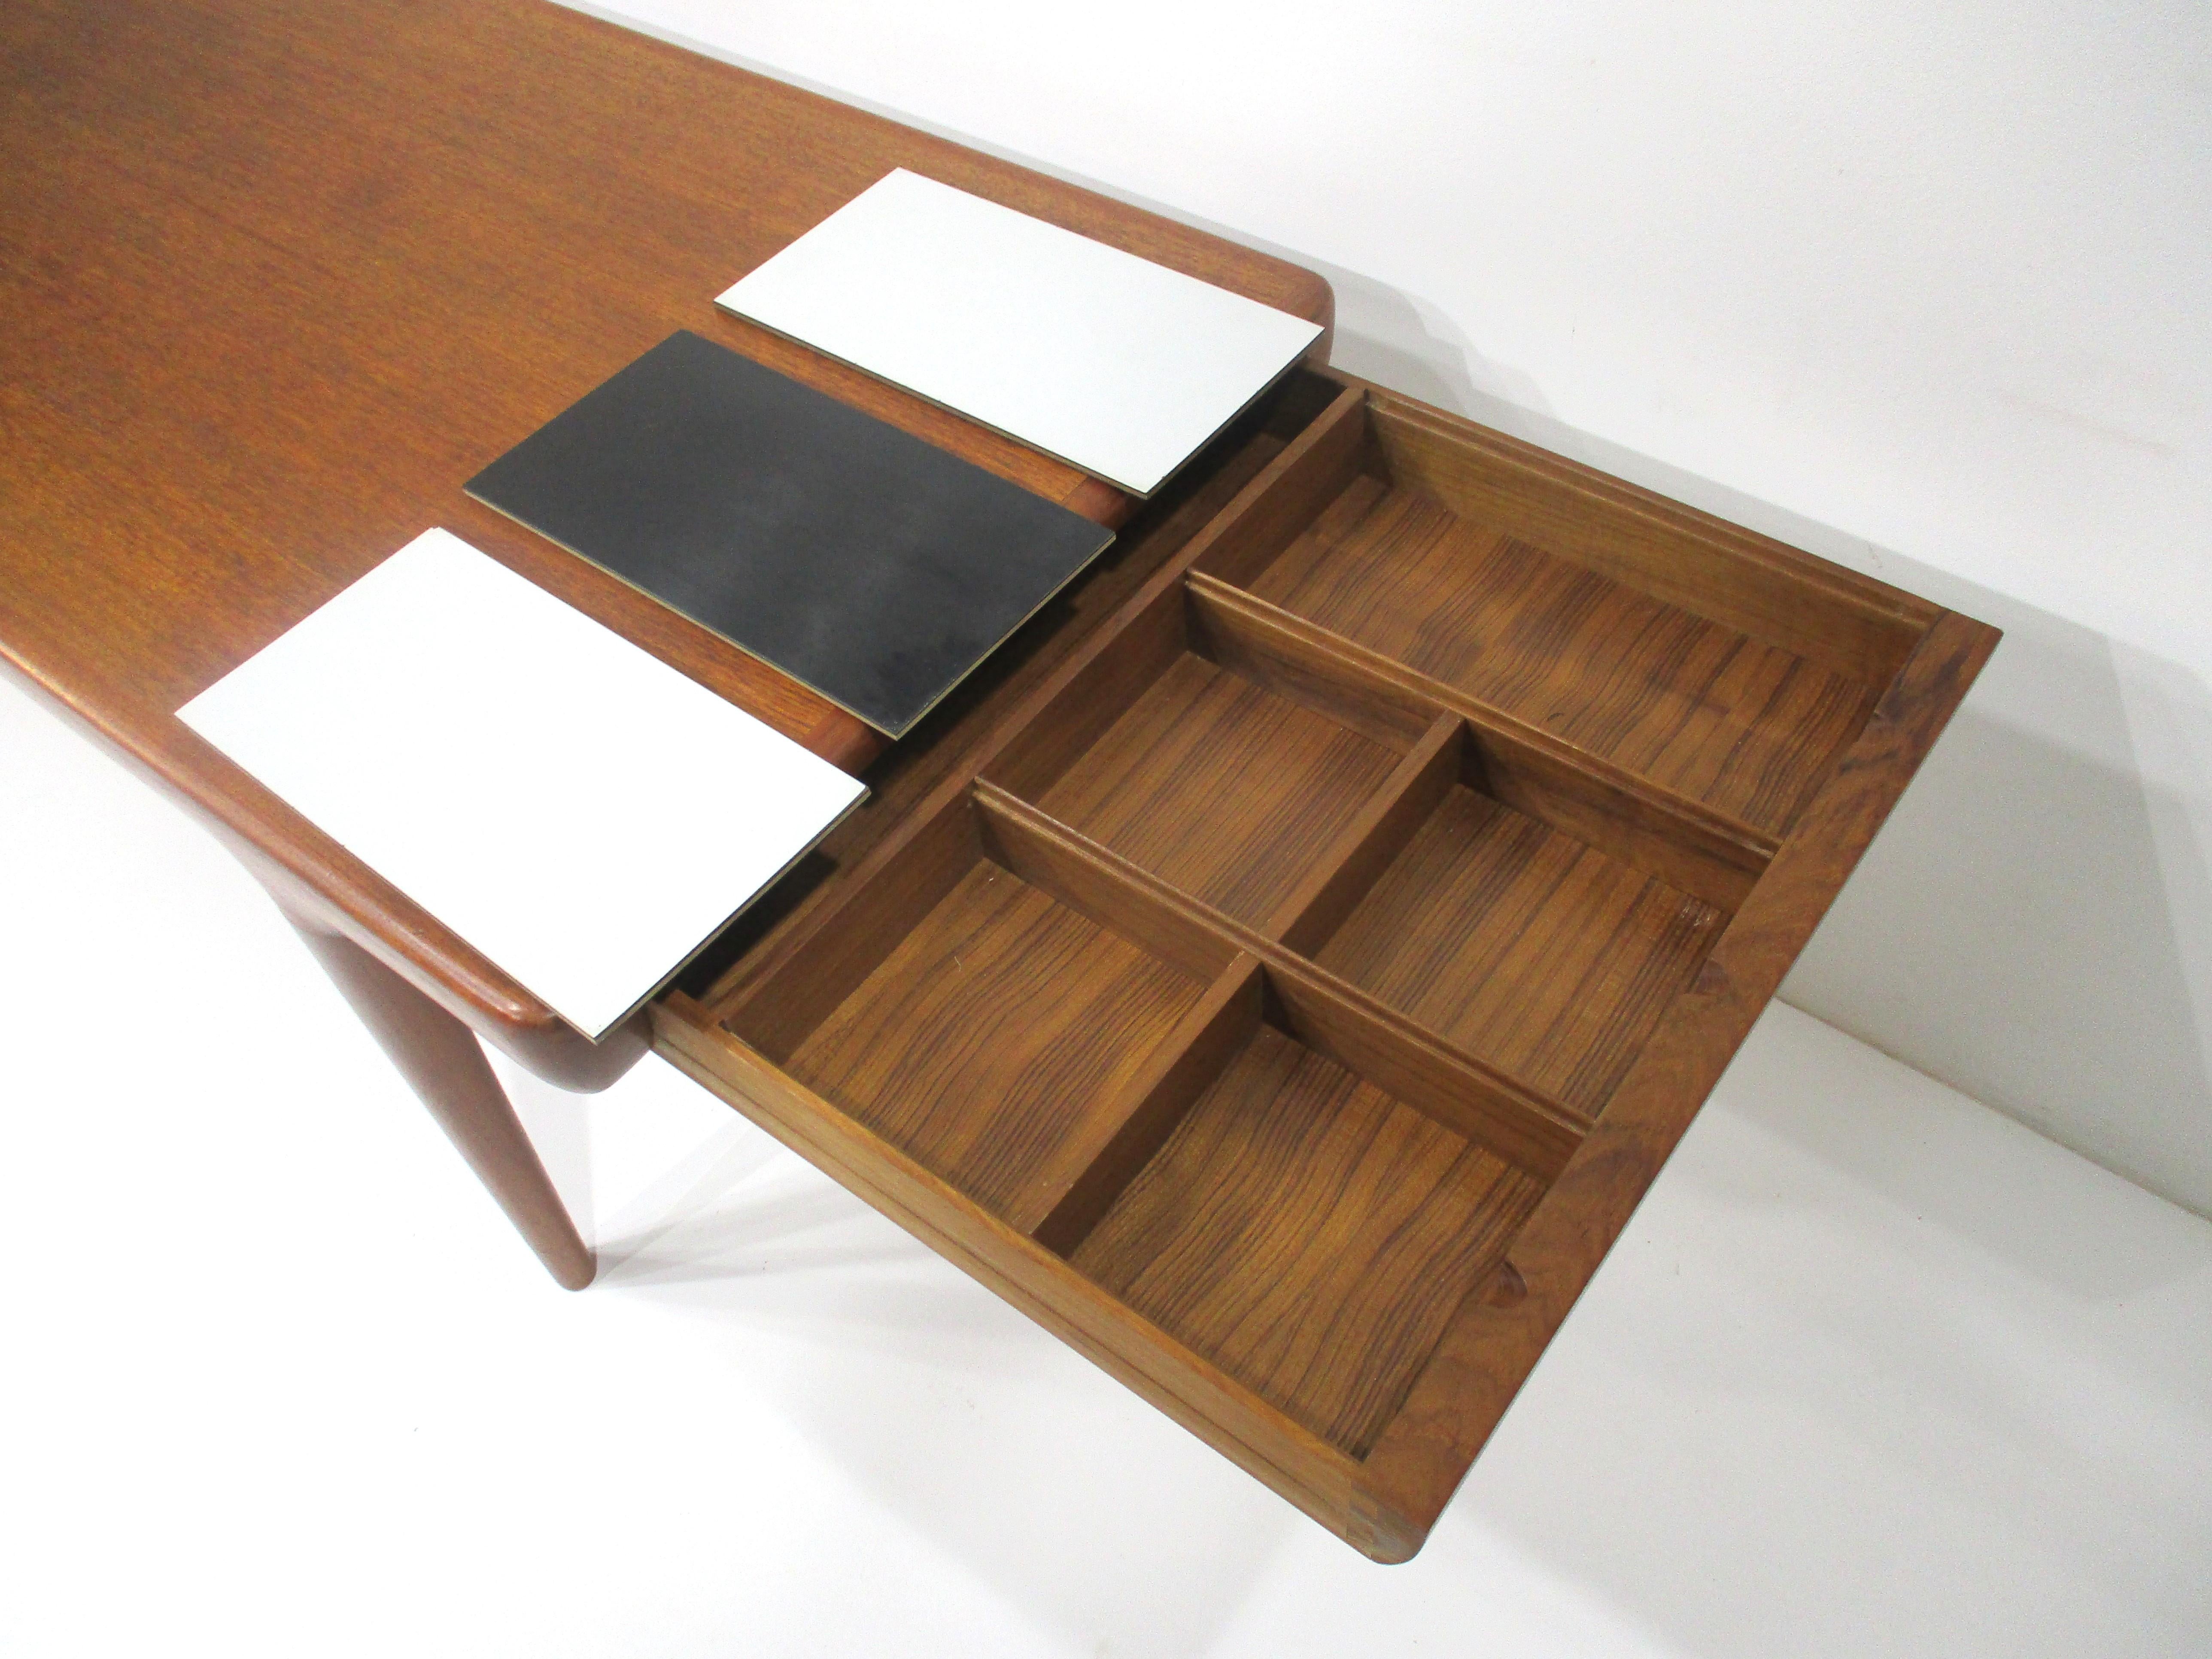 Teak Coffee Table w/ Pull Out Ends by Silkeborg -Johannes Andersen Denmark  3